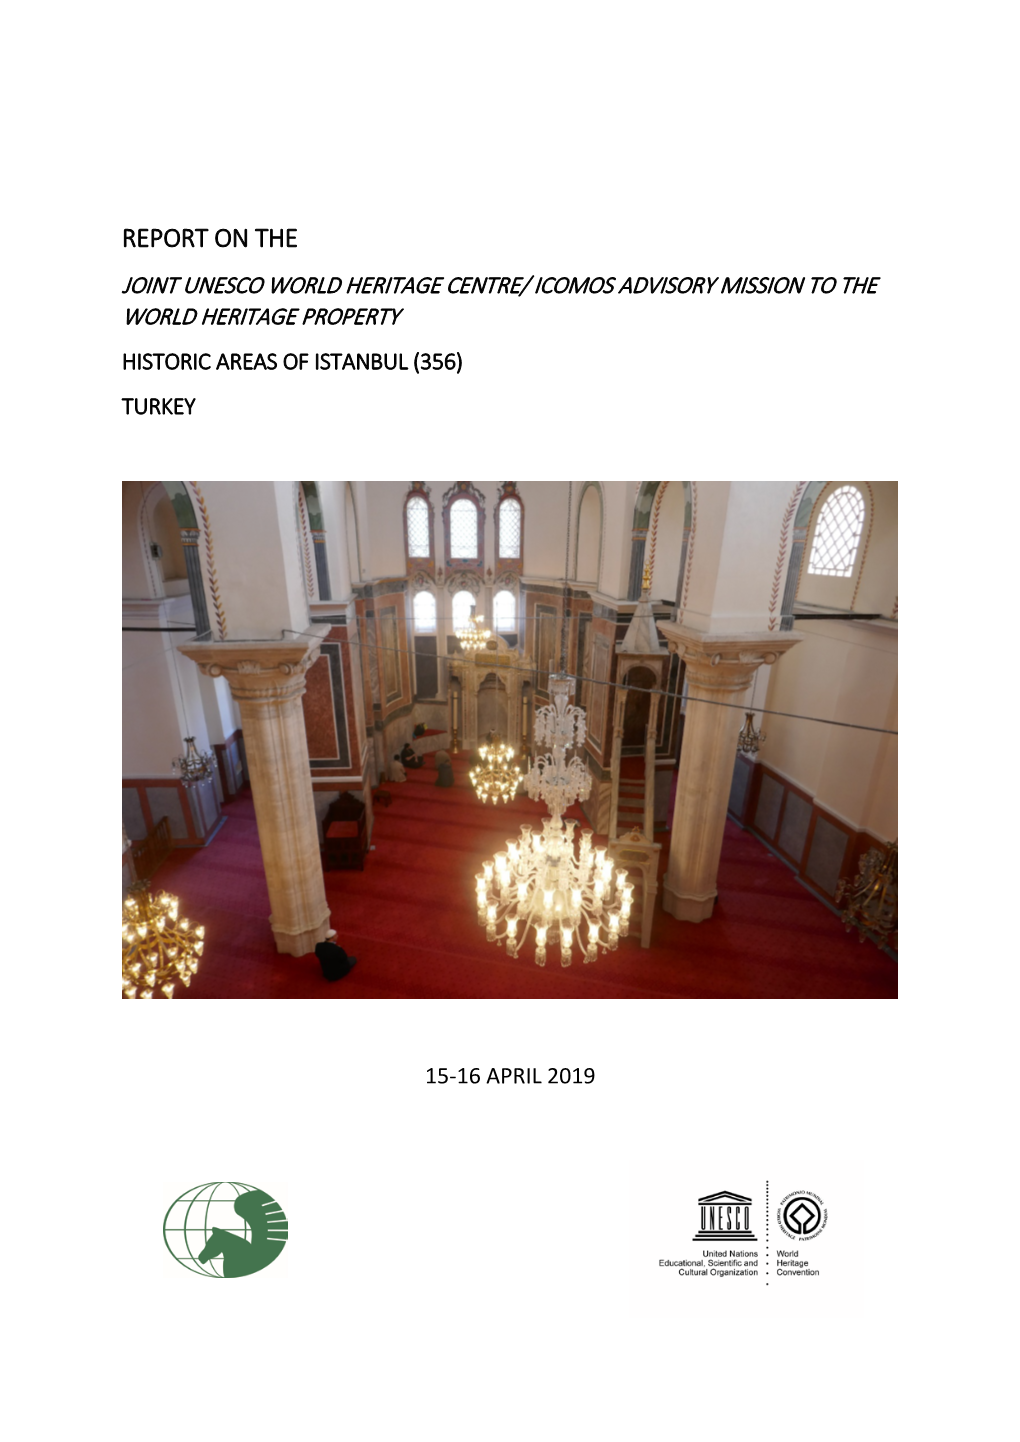 Report on the Joint Unesco World Heritage Centre/ Icomos Advisory Mission to the World Heritage Property Historic Areas of Istanbul (356) Turkey